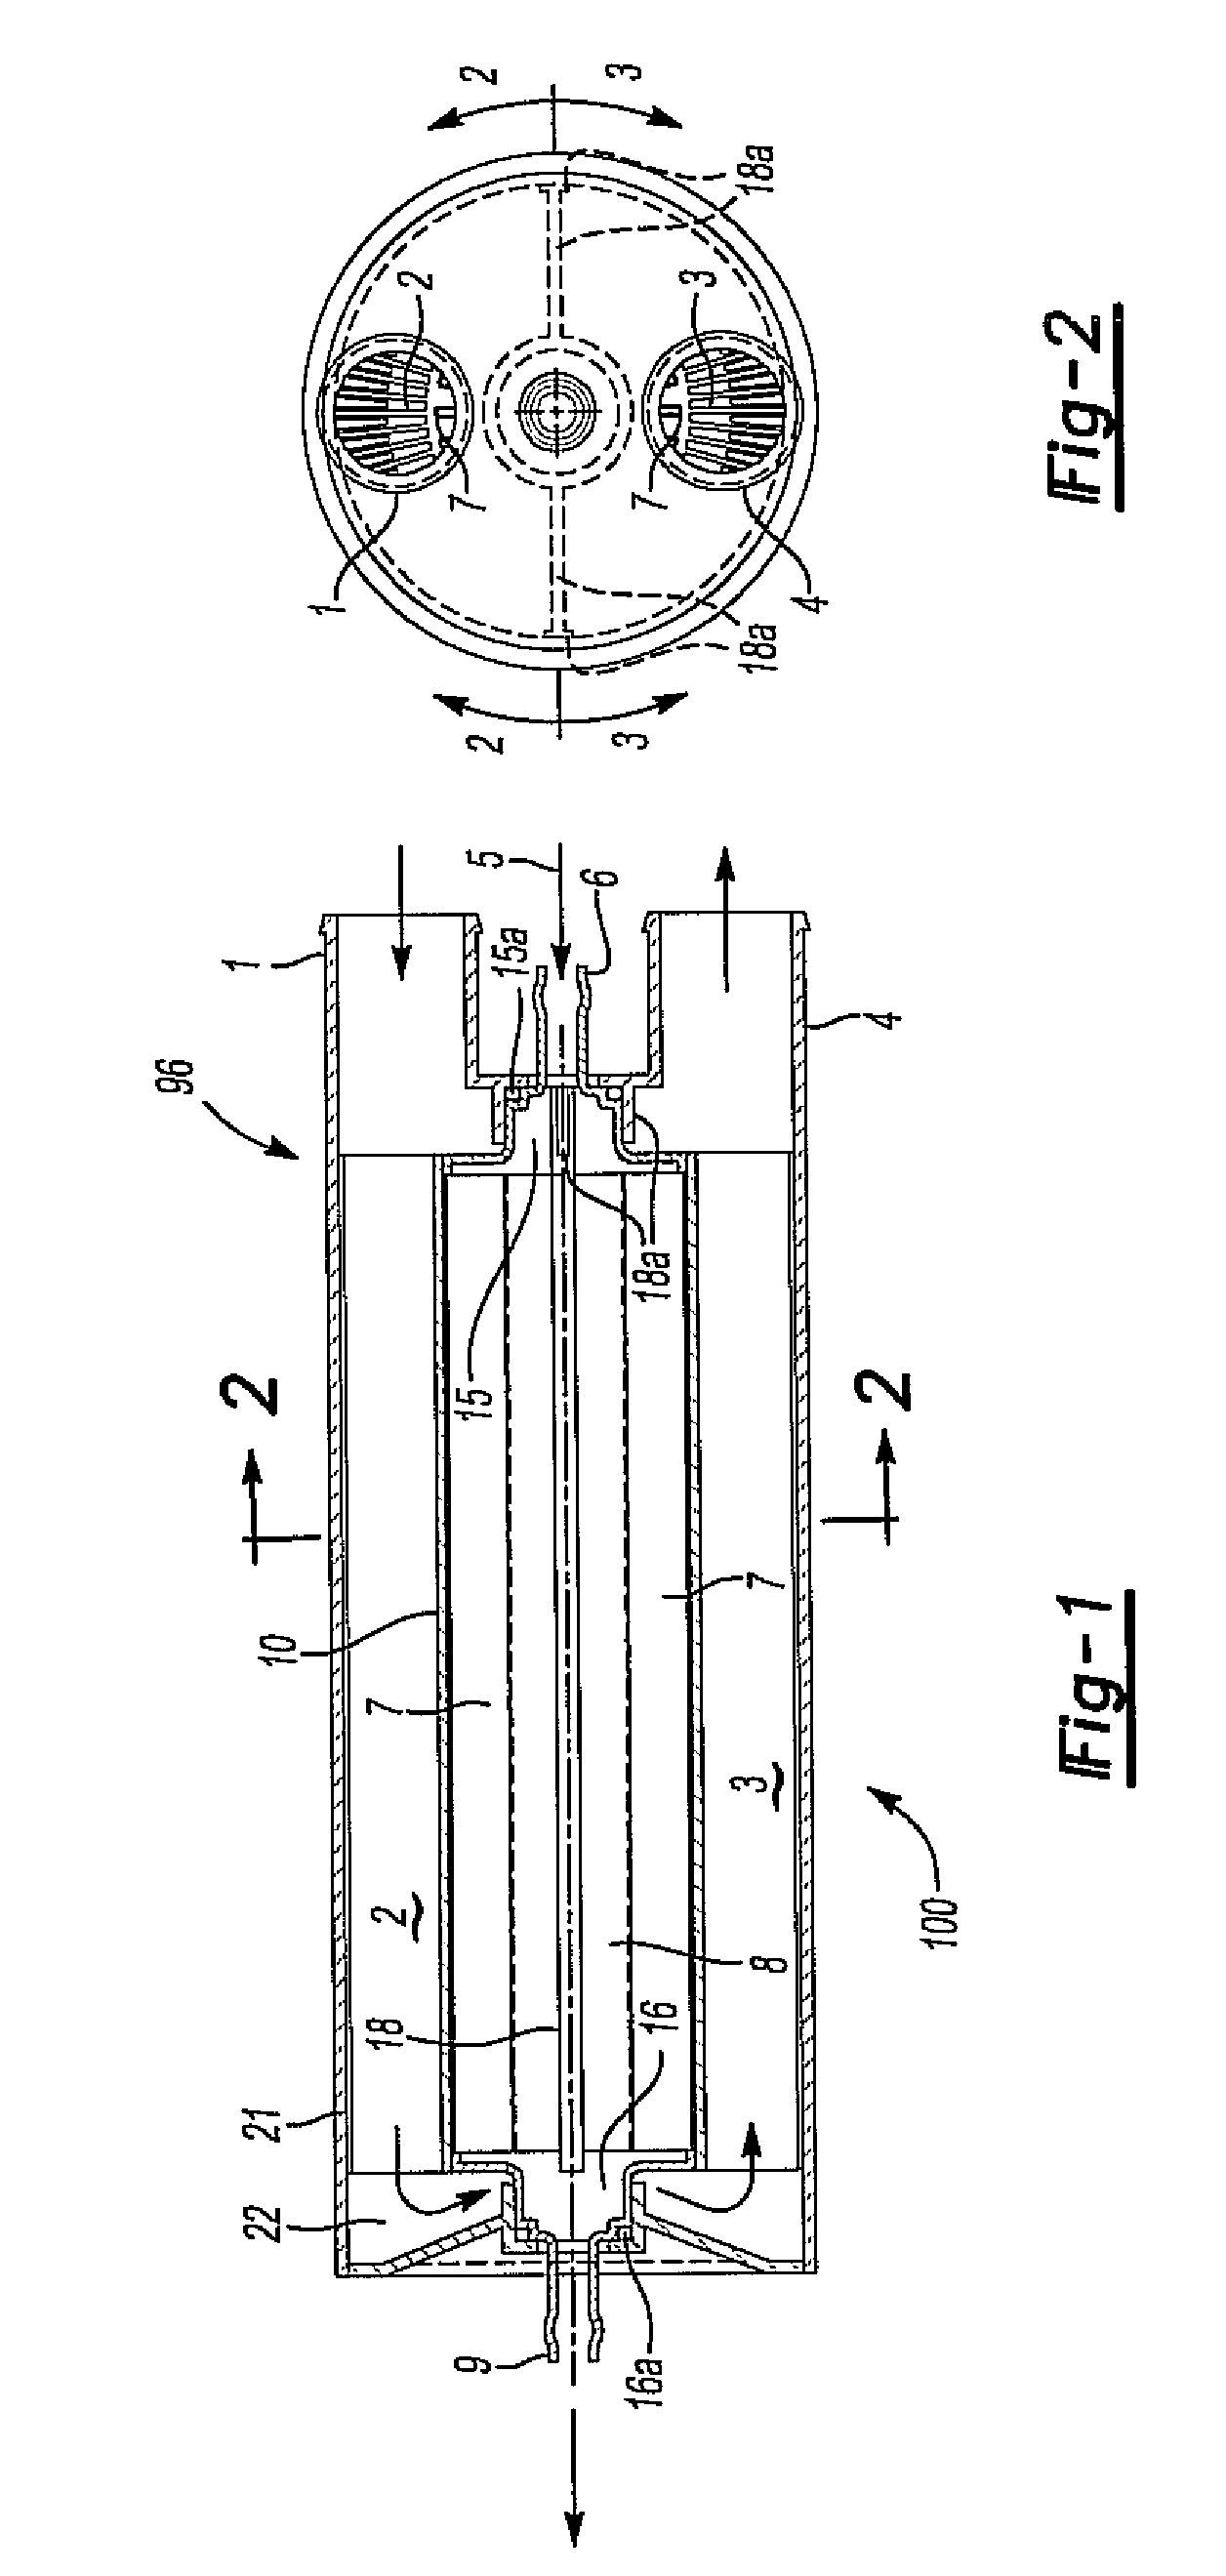 Windshield washer fluid heater and system